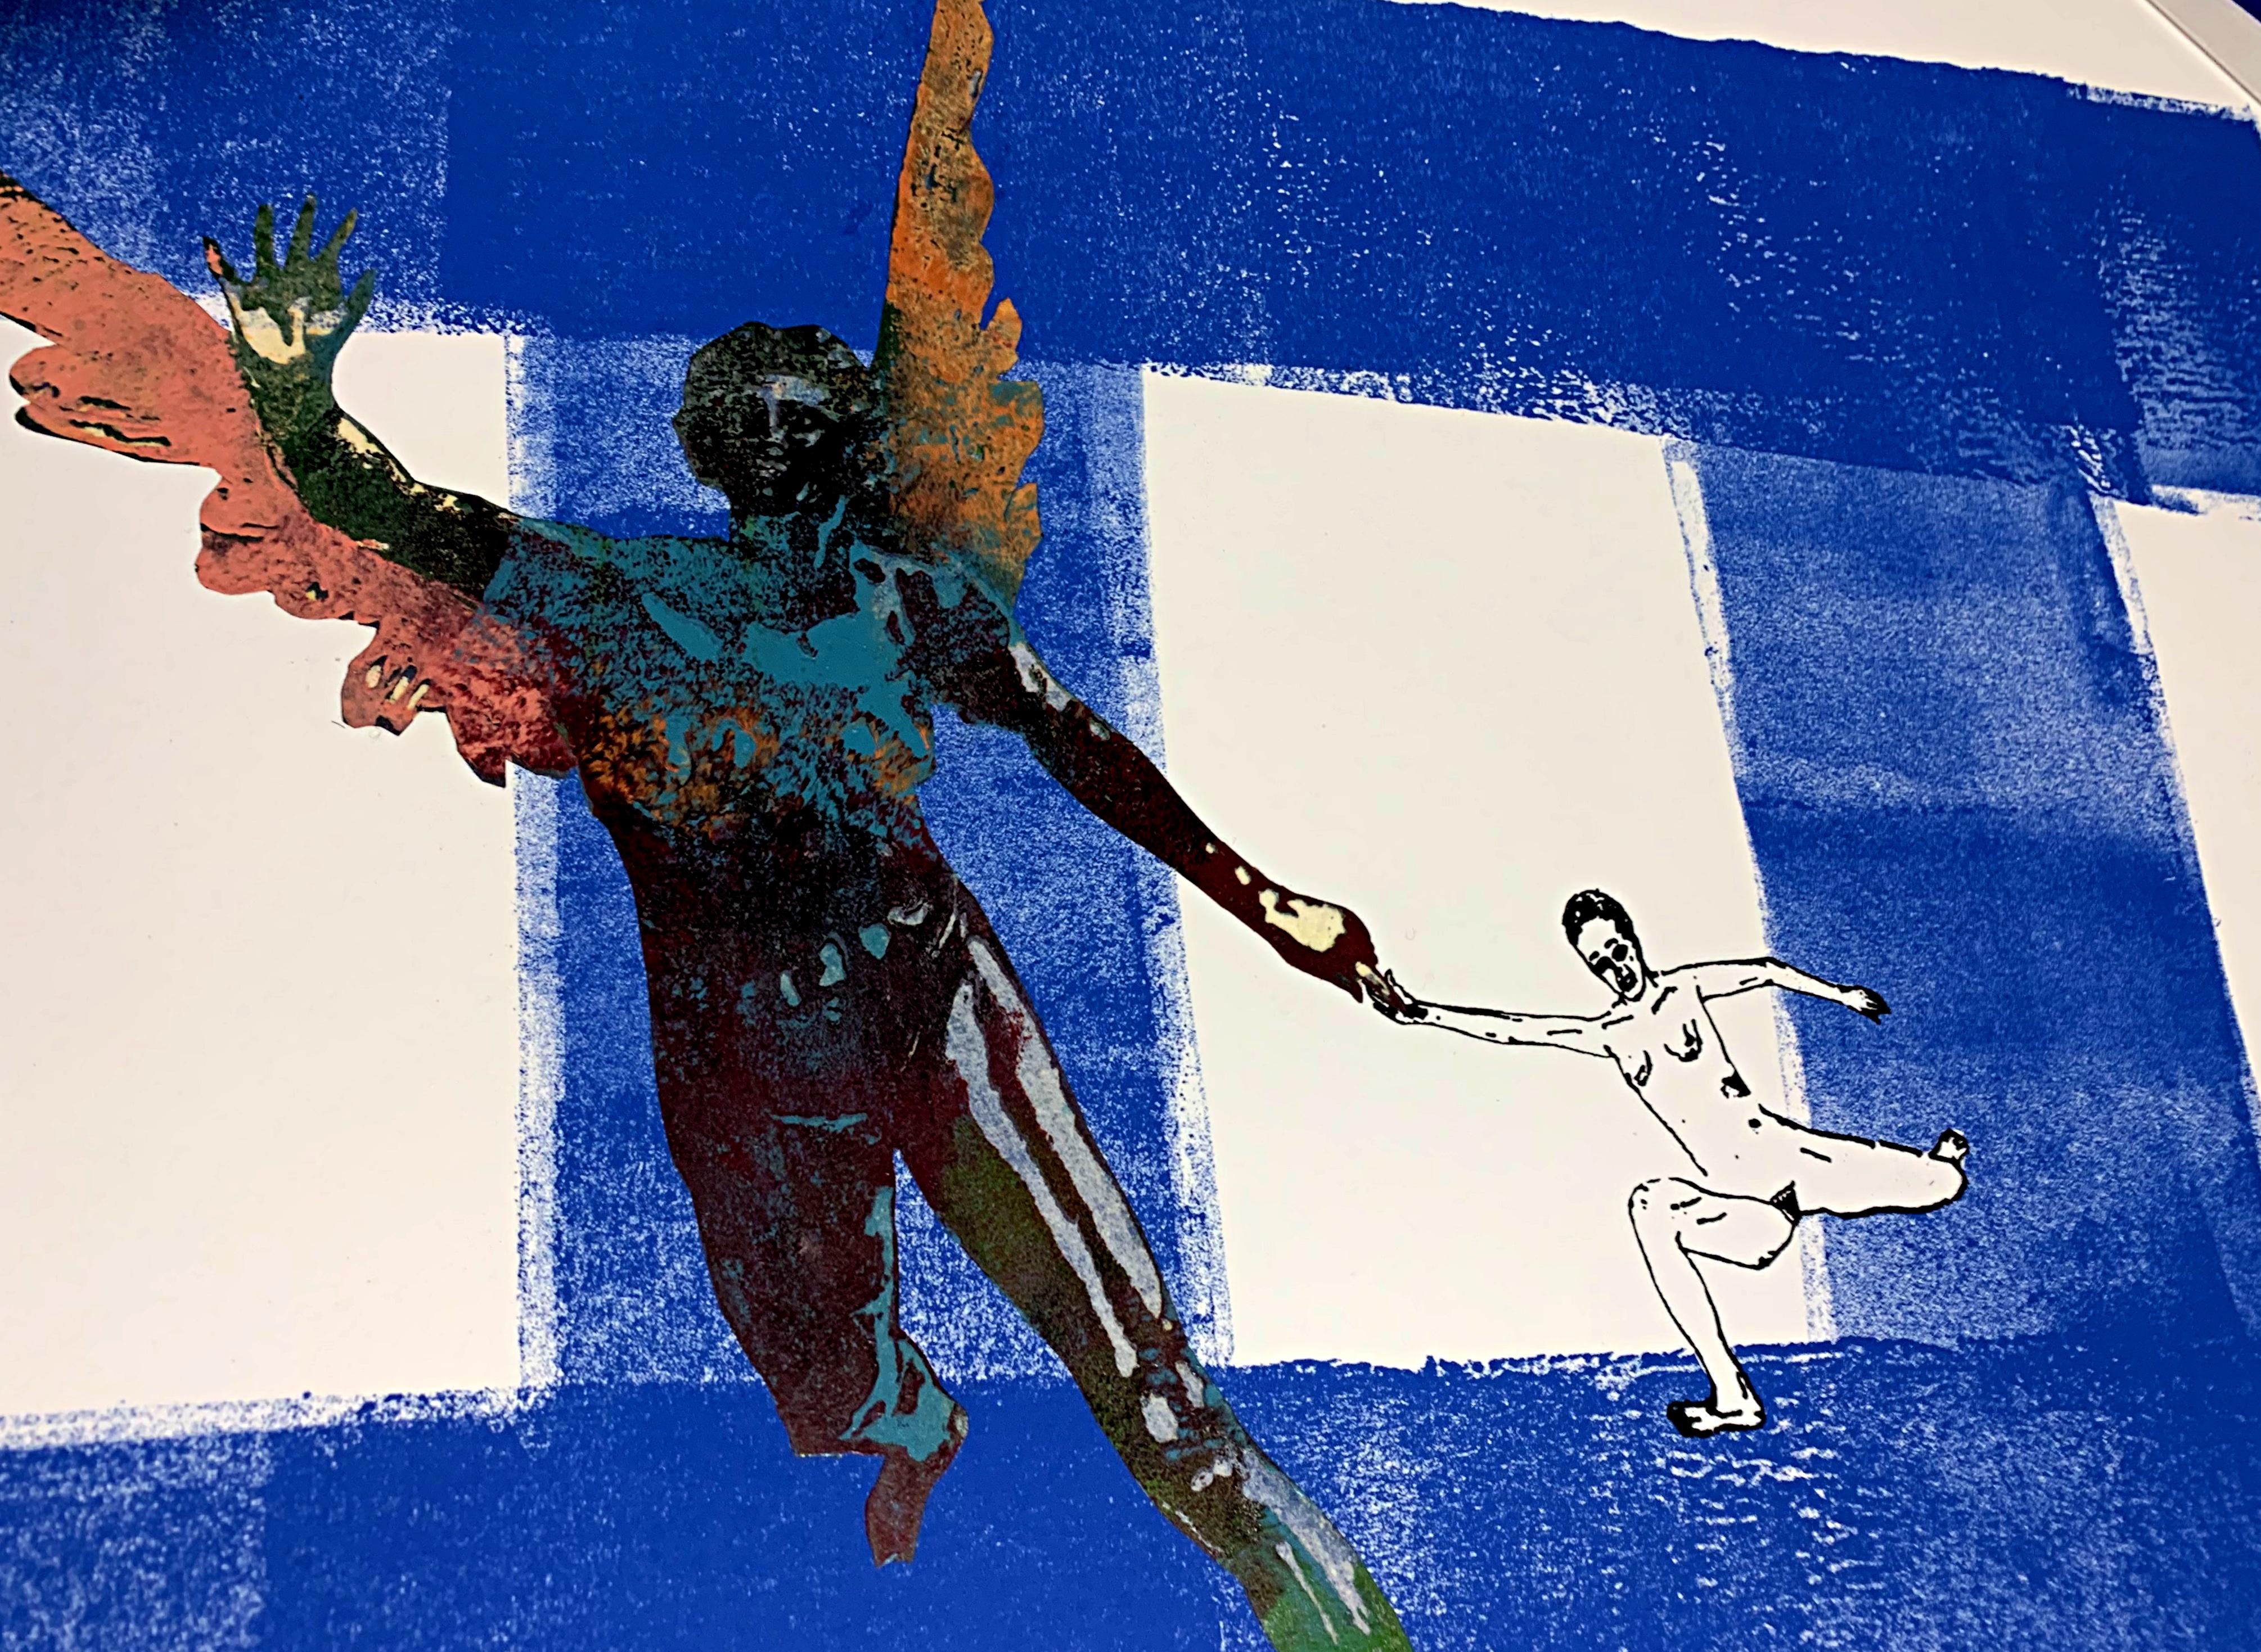 Nancy Spero
Airborne, 1998
Mixed Media: Silkscreen with collage additions on Somerset velvet paper
30 × 22 inches
Edition of 50
Signed, dated and numbered from the limited edition of only 50 on the front
Unframed
Very poignant imagery: an airborne